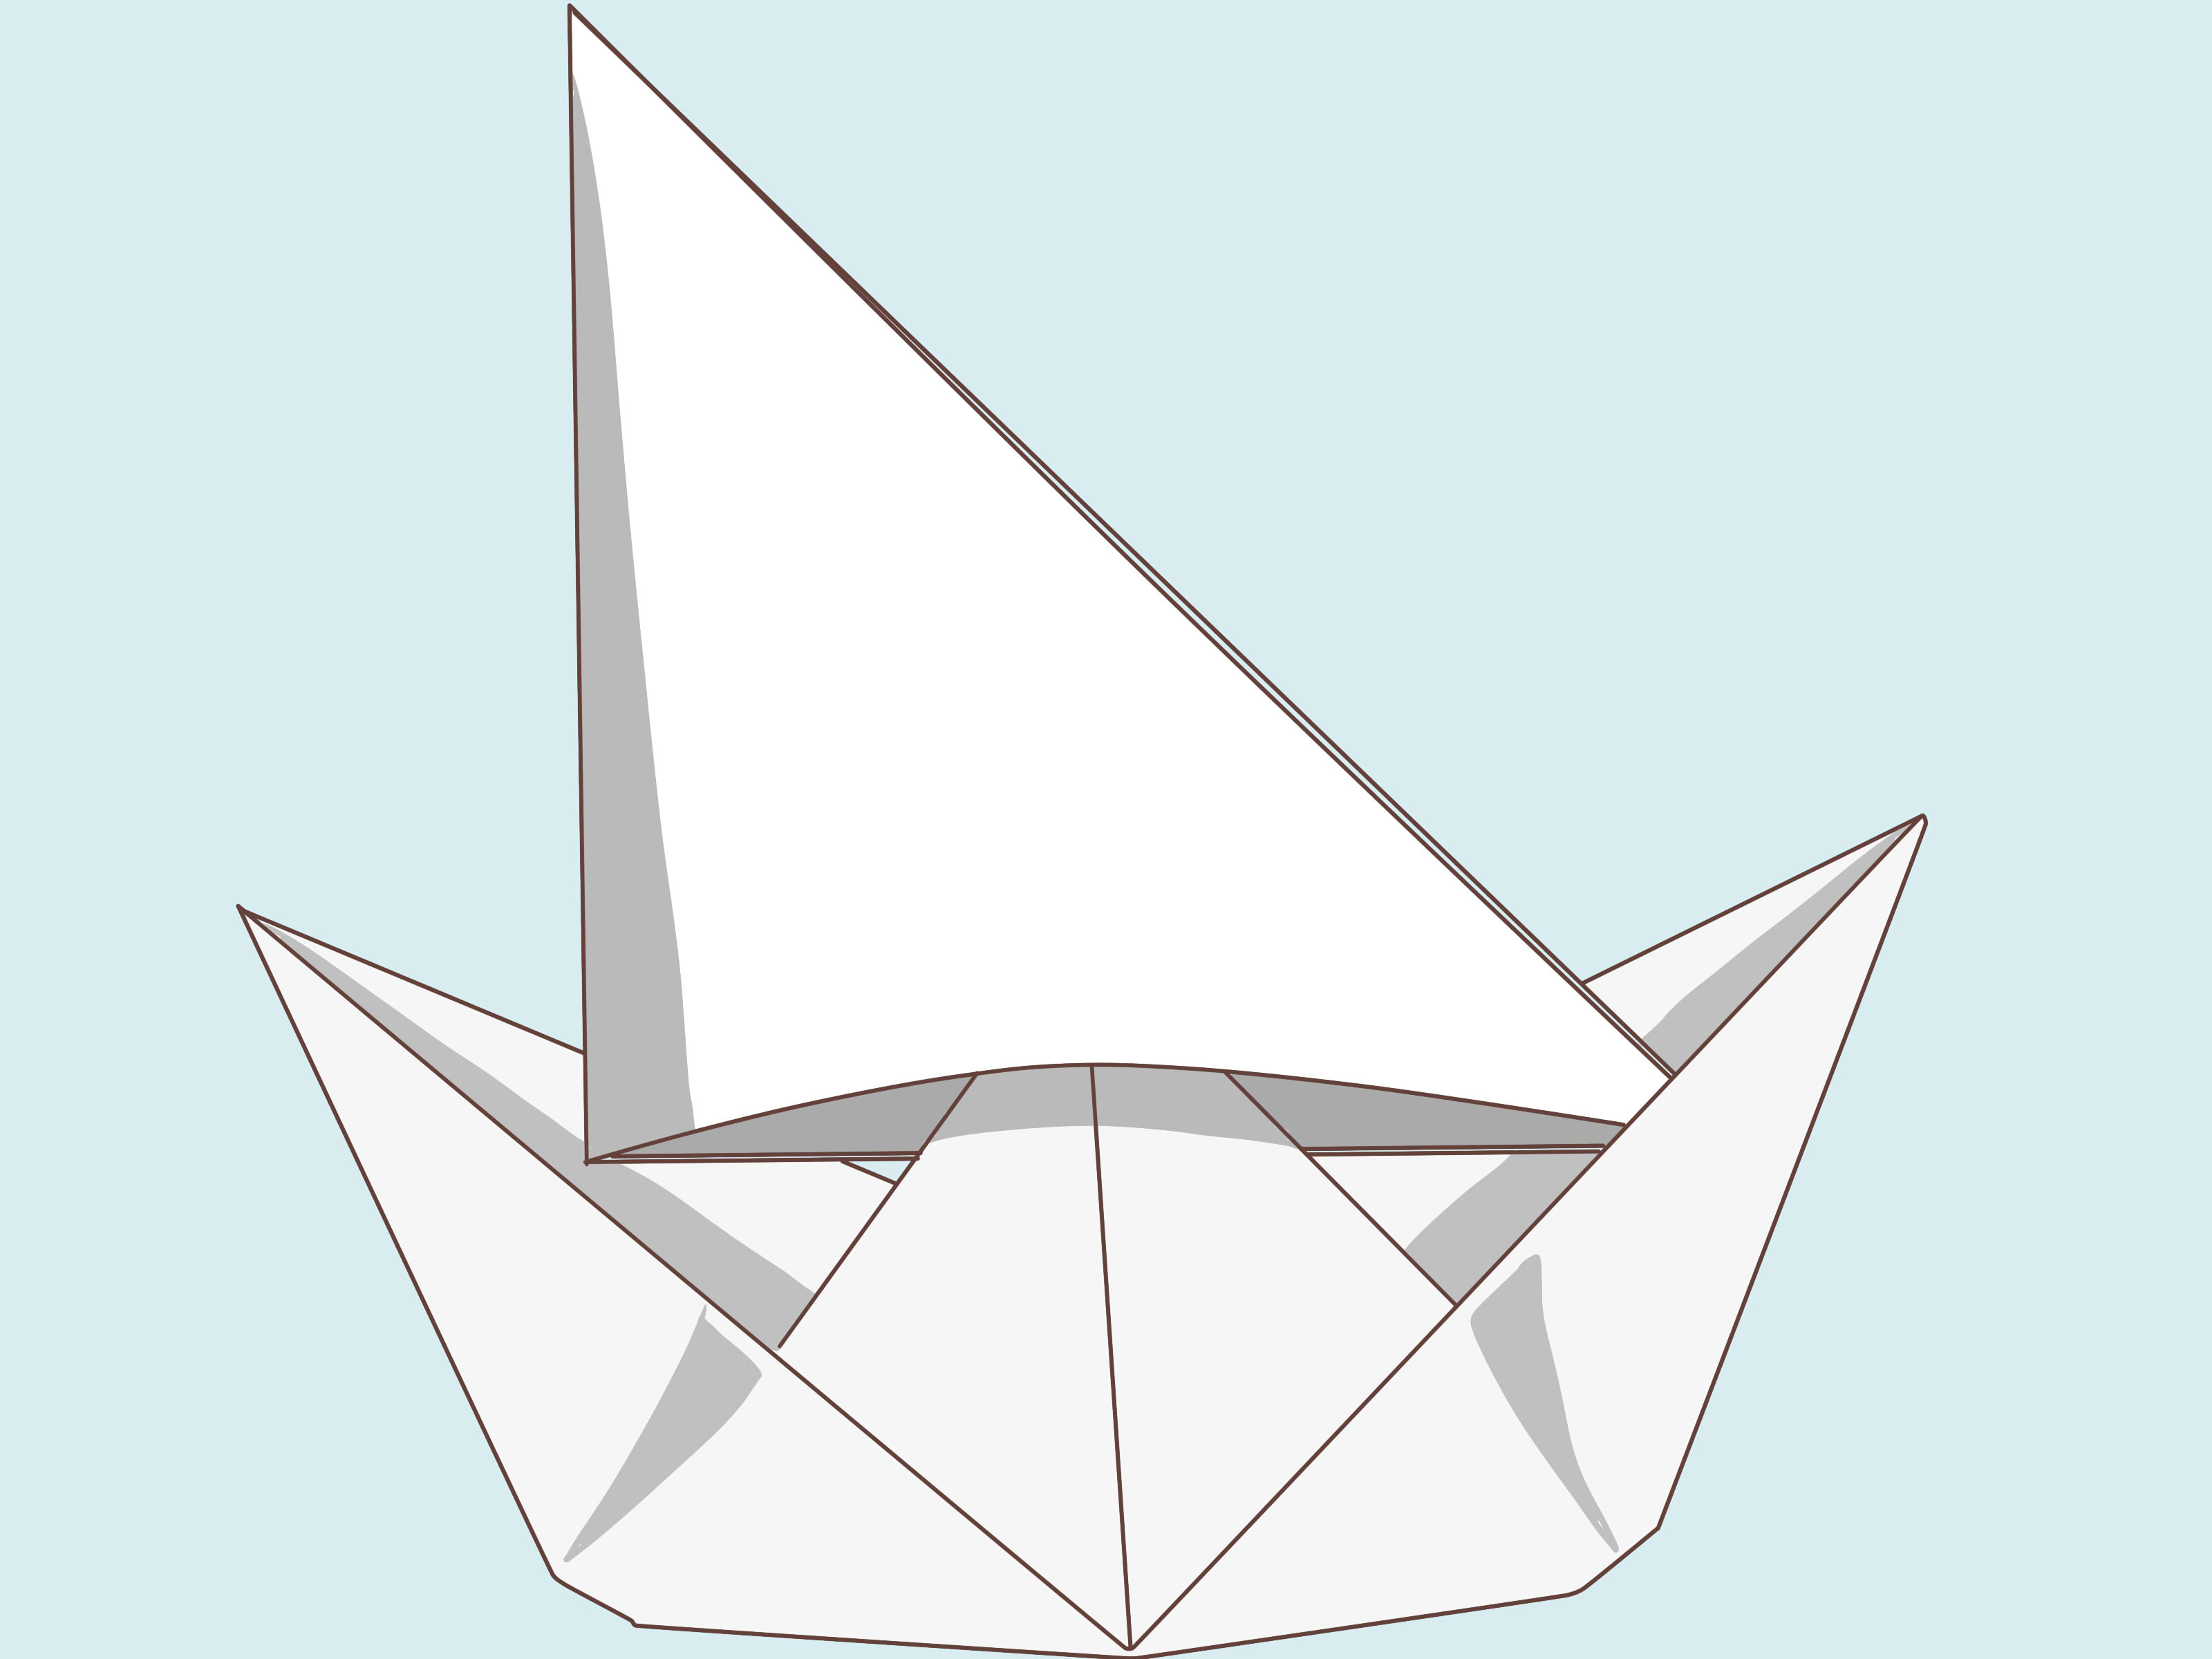 How To Make A Origami Sailboat How To Make A Paper Boat With A Big Sail 12 Steps With Pictures